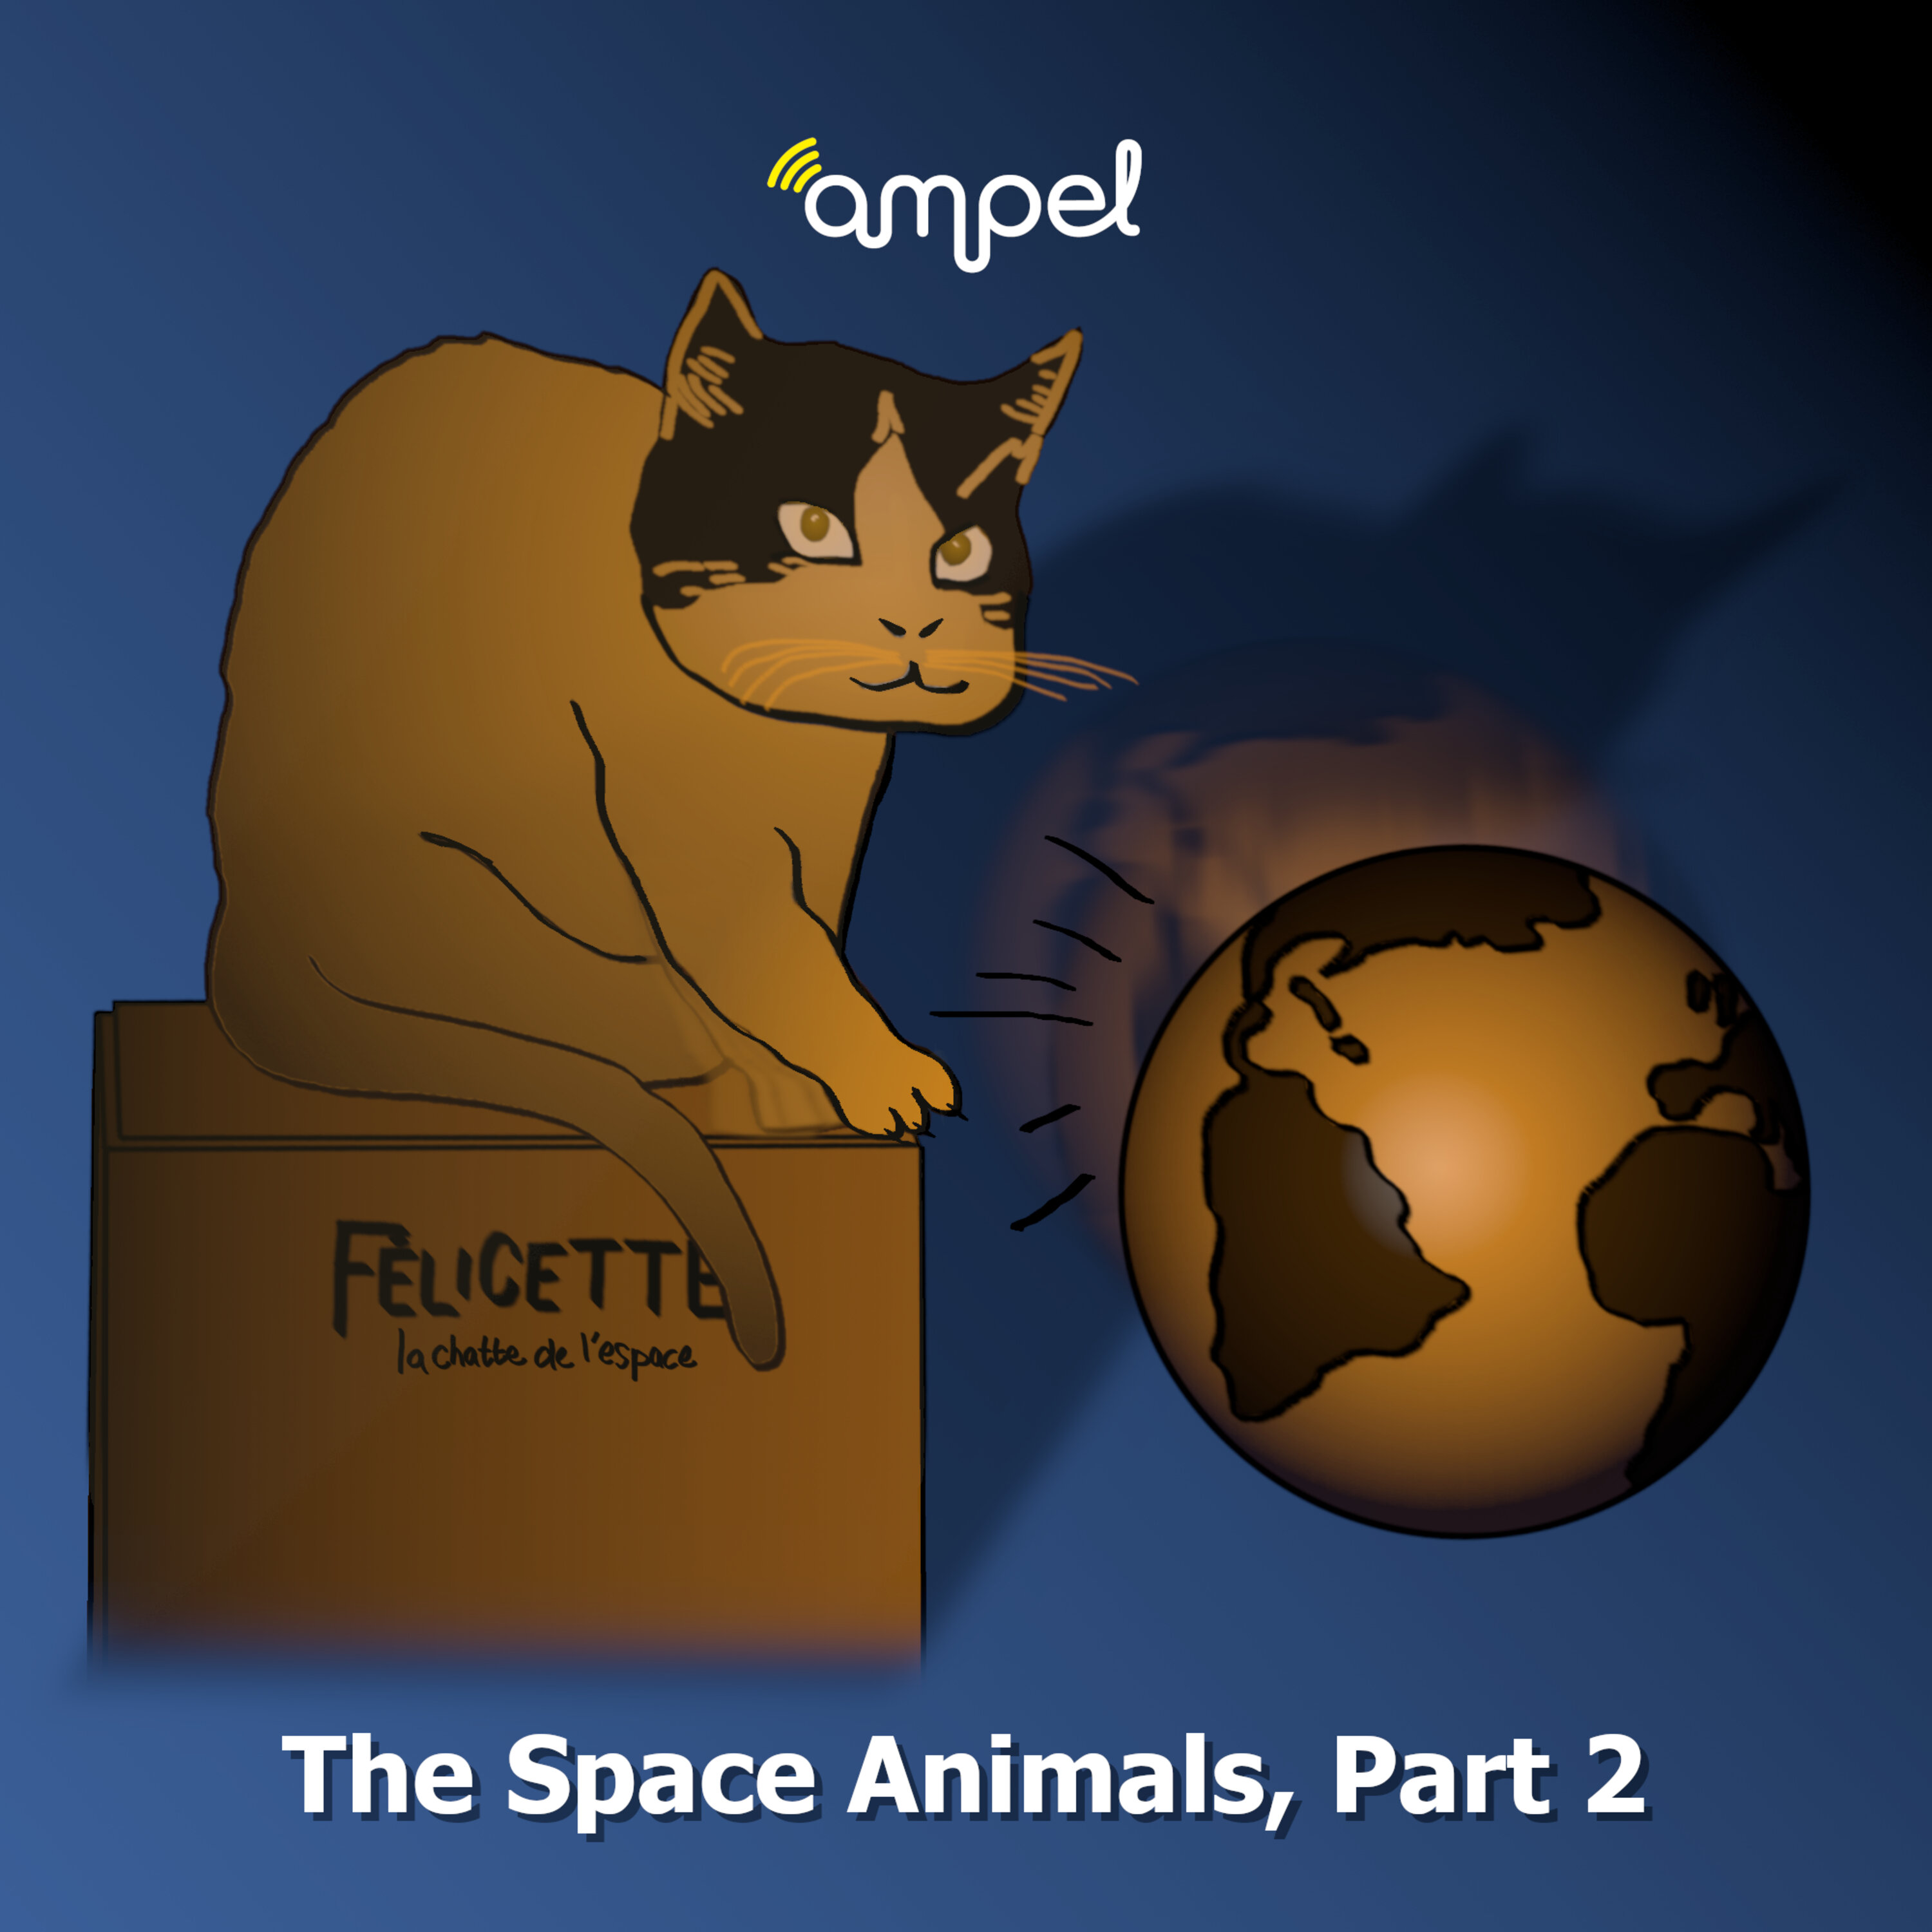 The Space Animals, Part 2